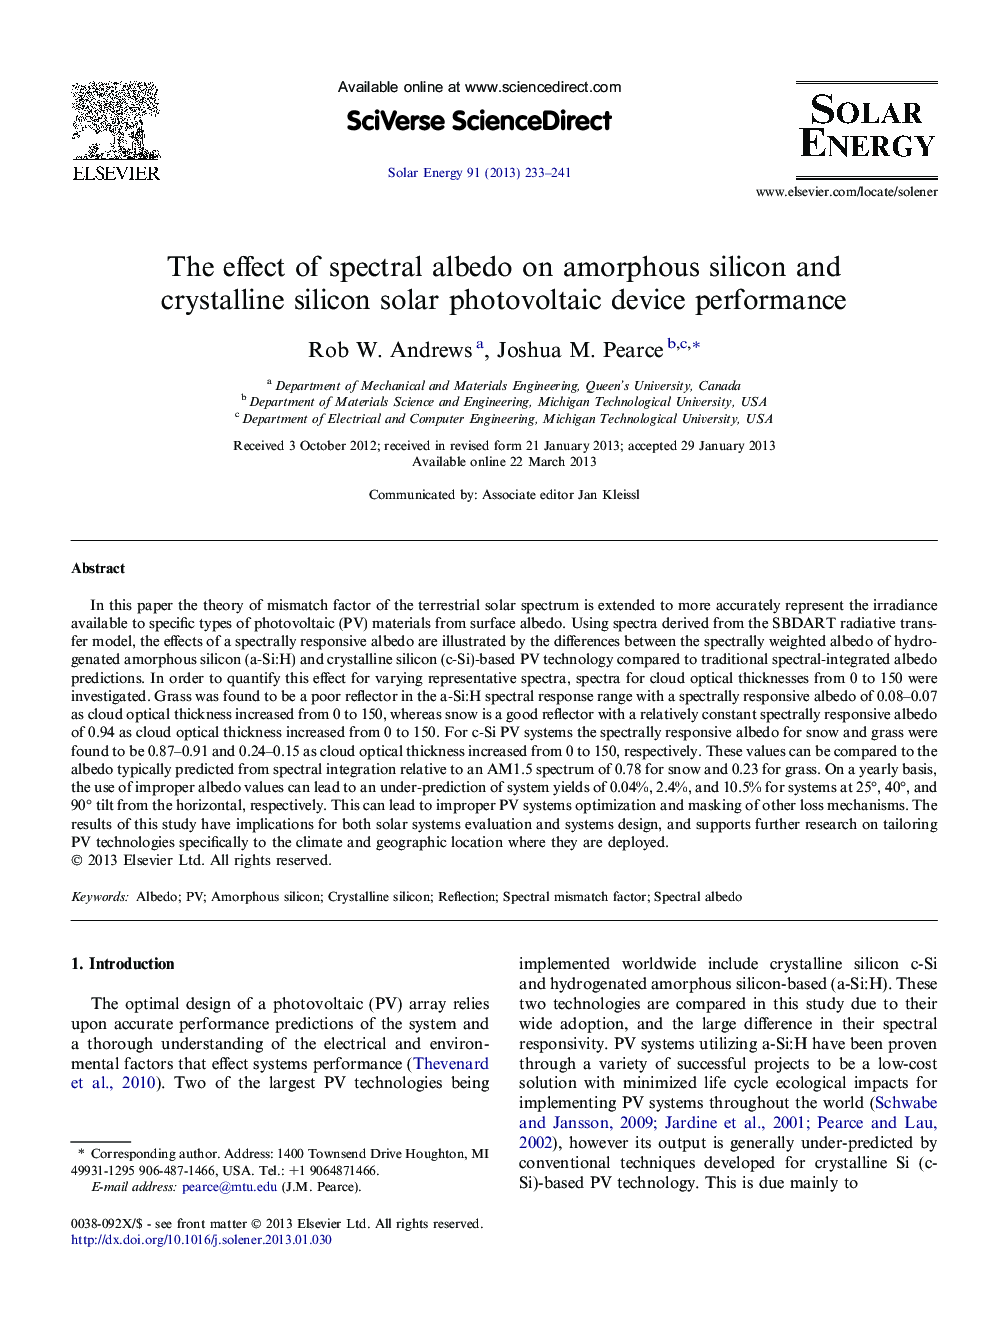 The effect of spectral albedo on amorphous silicon and crystalline silicon solar photovoltaic device performance